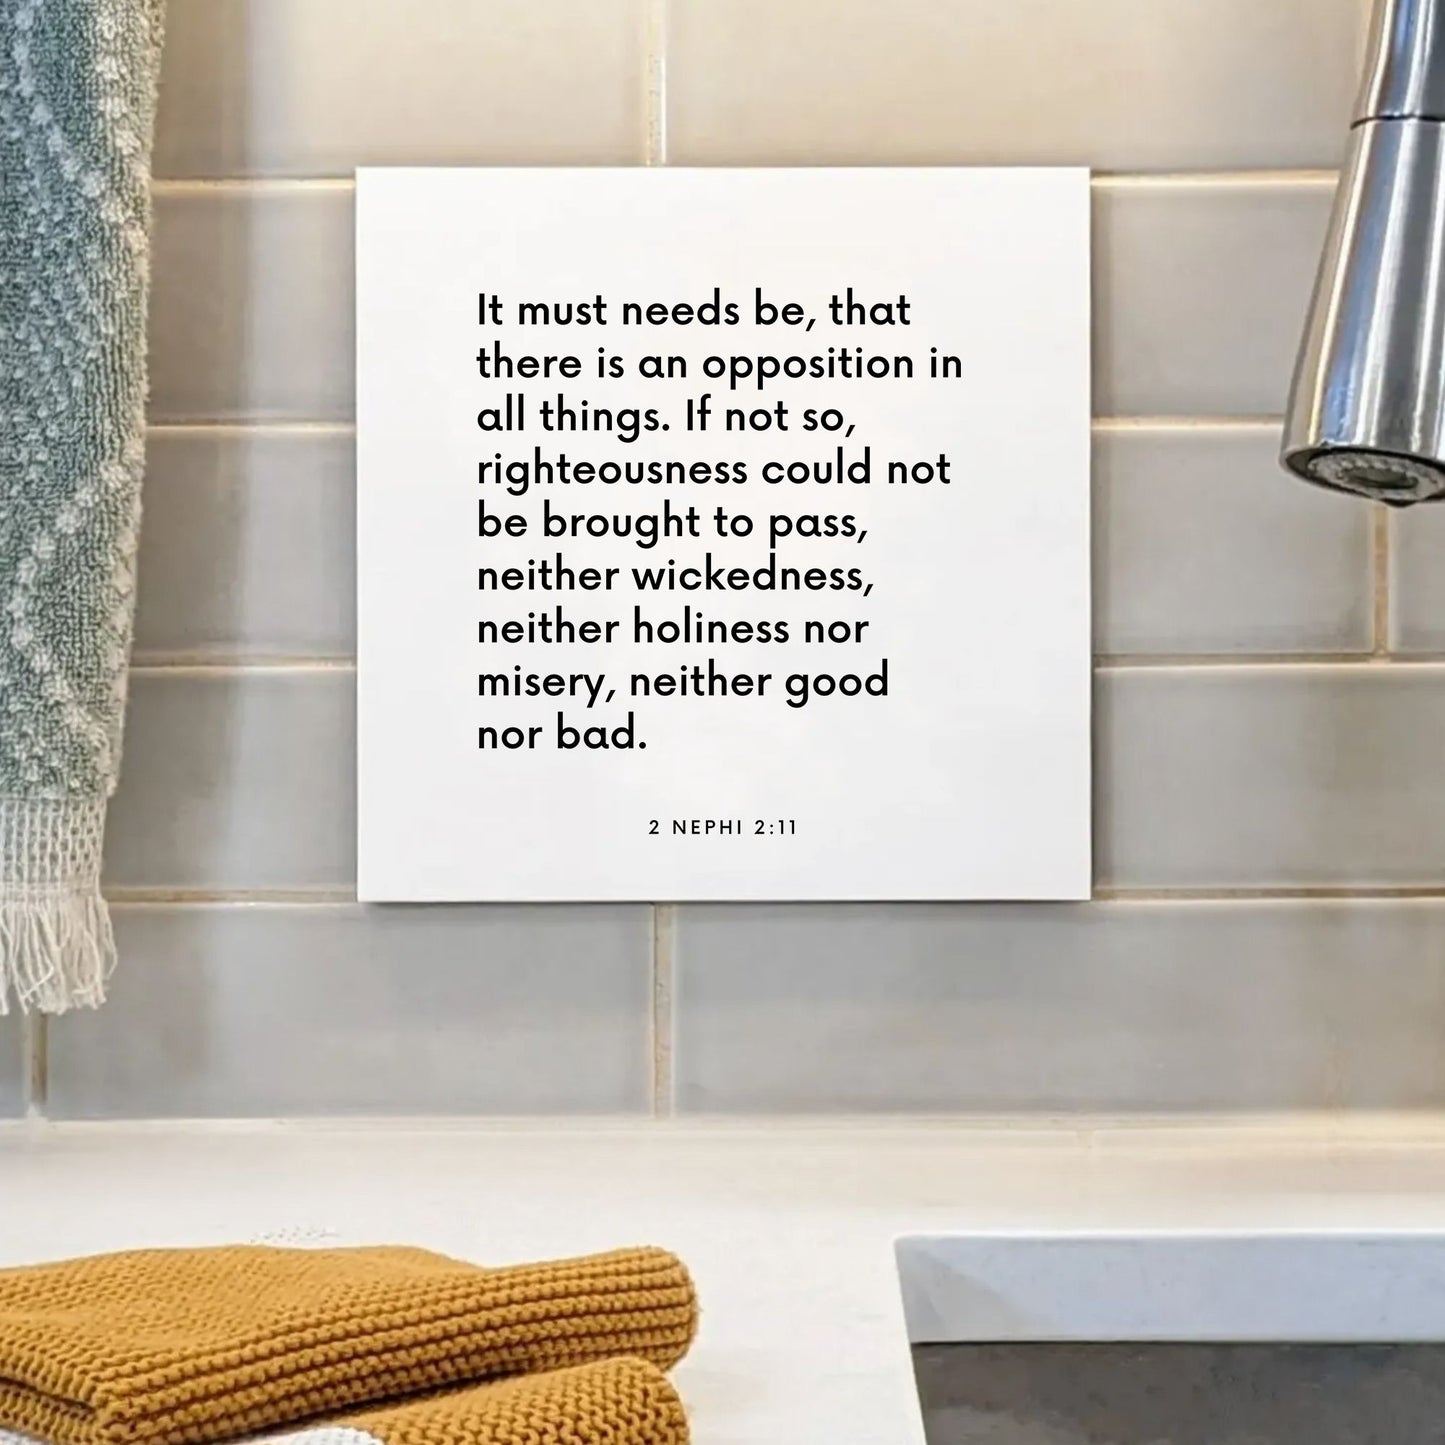 Sink mouting of the scripture tile for 2 Nephi 2:11 - "It must needs be, that there is an opposition in all things"